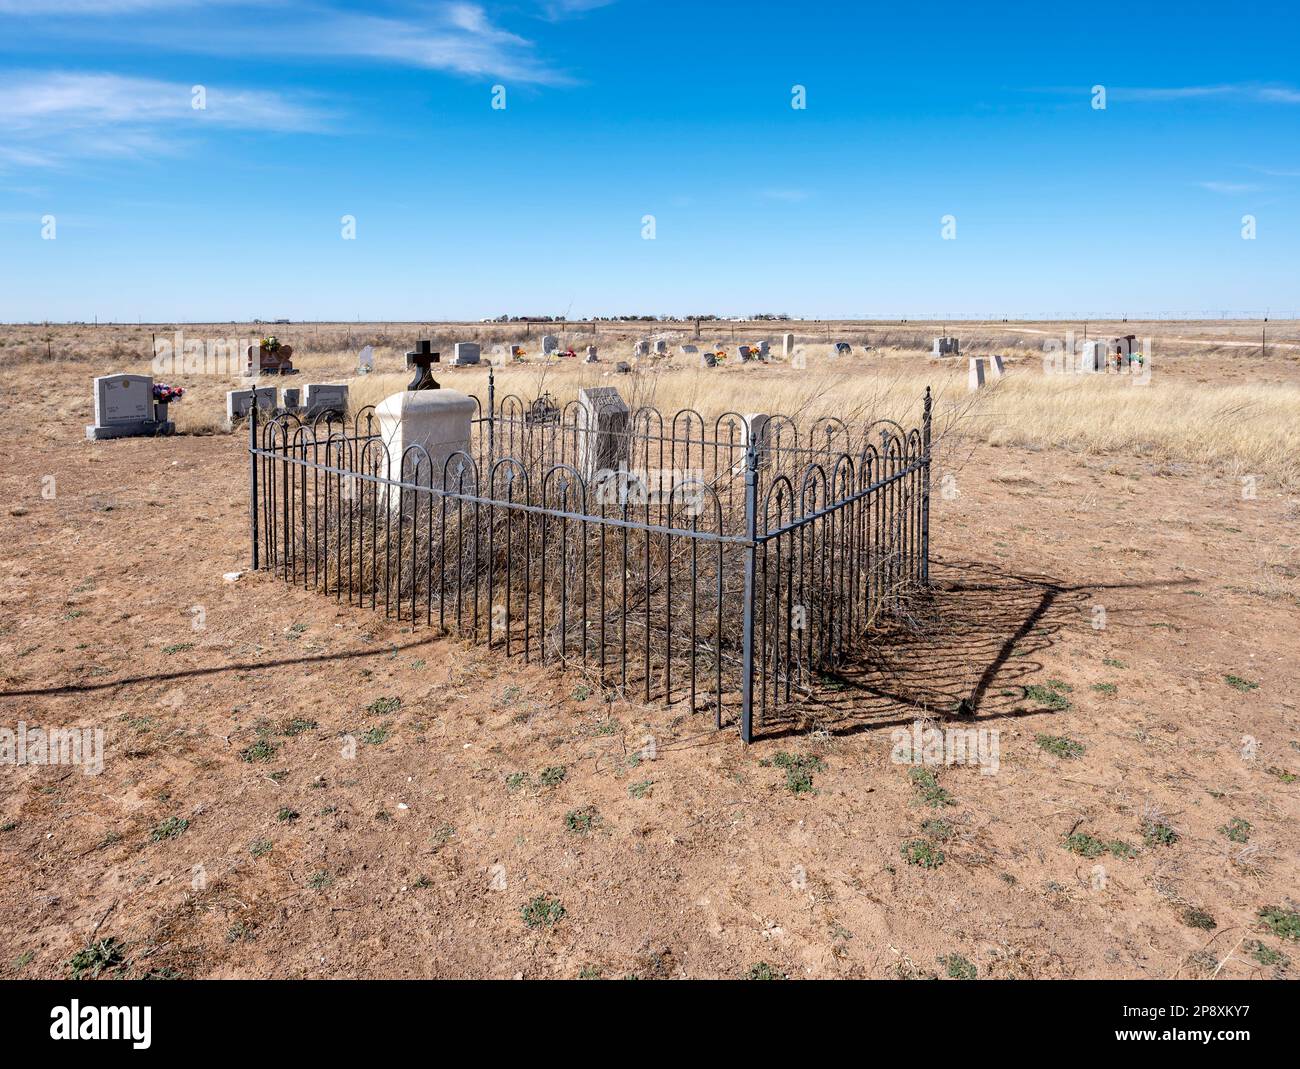 Teague Cemetery (aka Knowles Cemetery) in the desert landscape near the city of Hobbs, New Mexico, USA Stock Photo